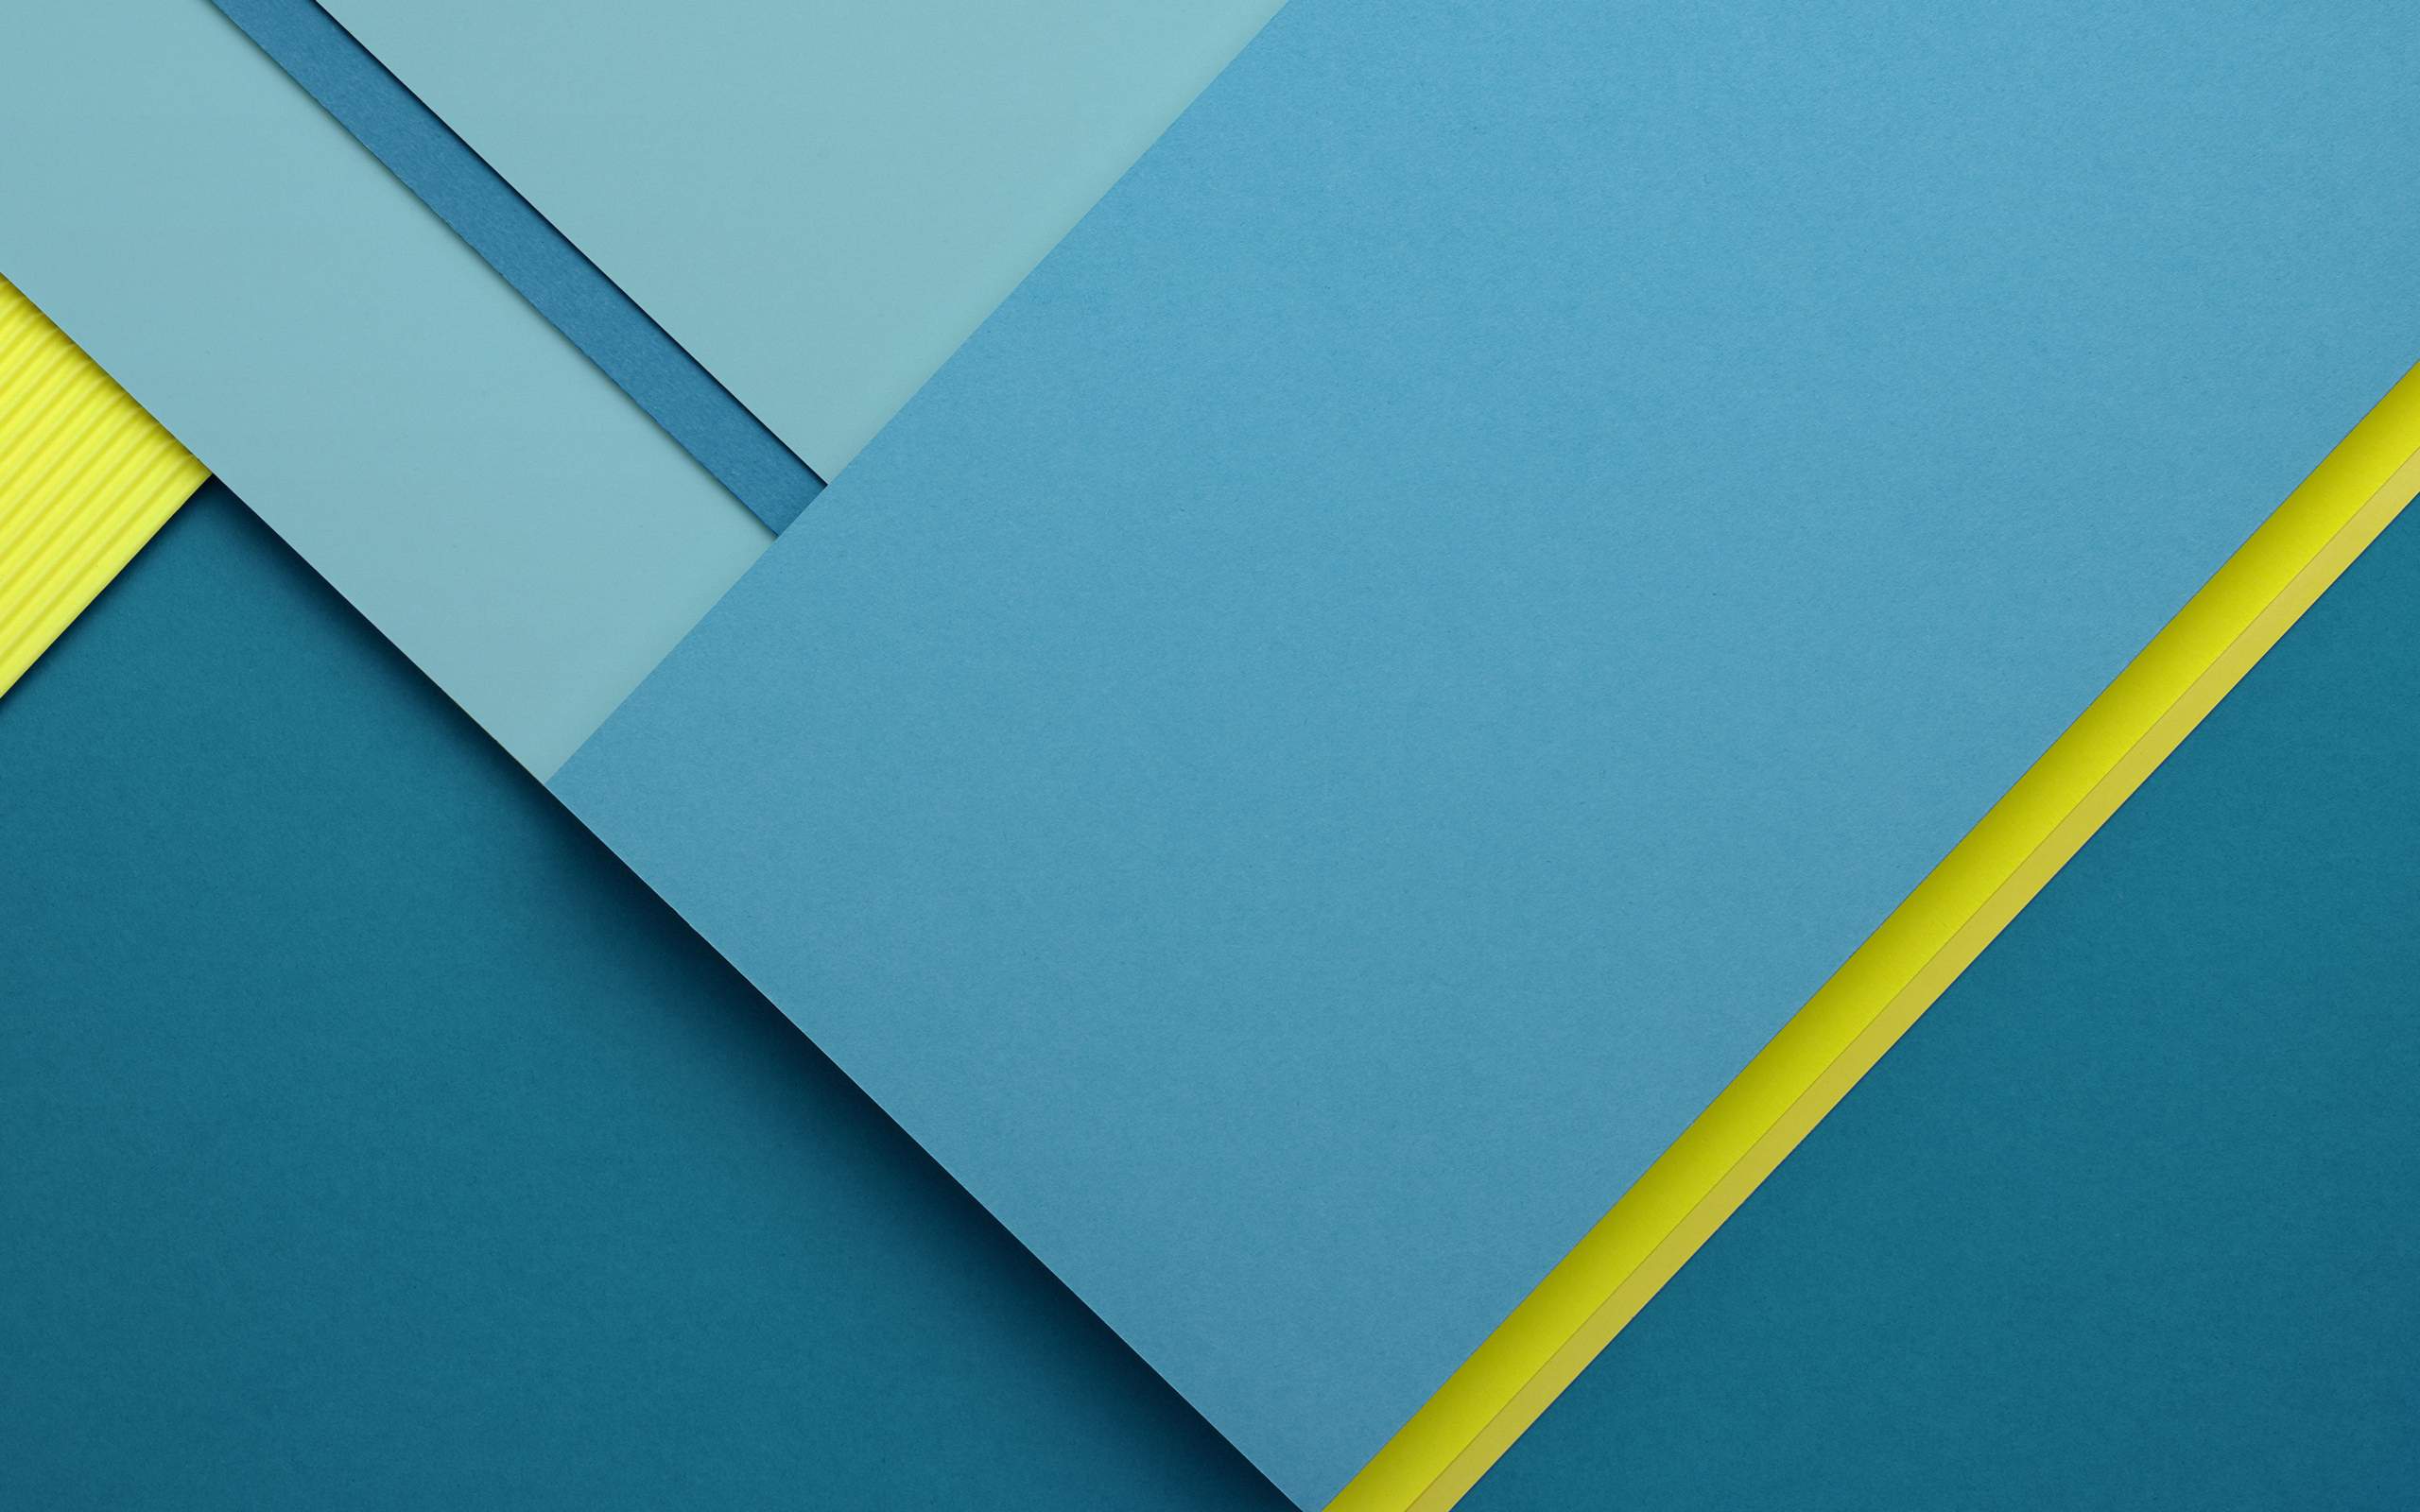 New Default Wallpaper Full Of Material Design Androidheadlines